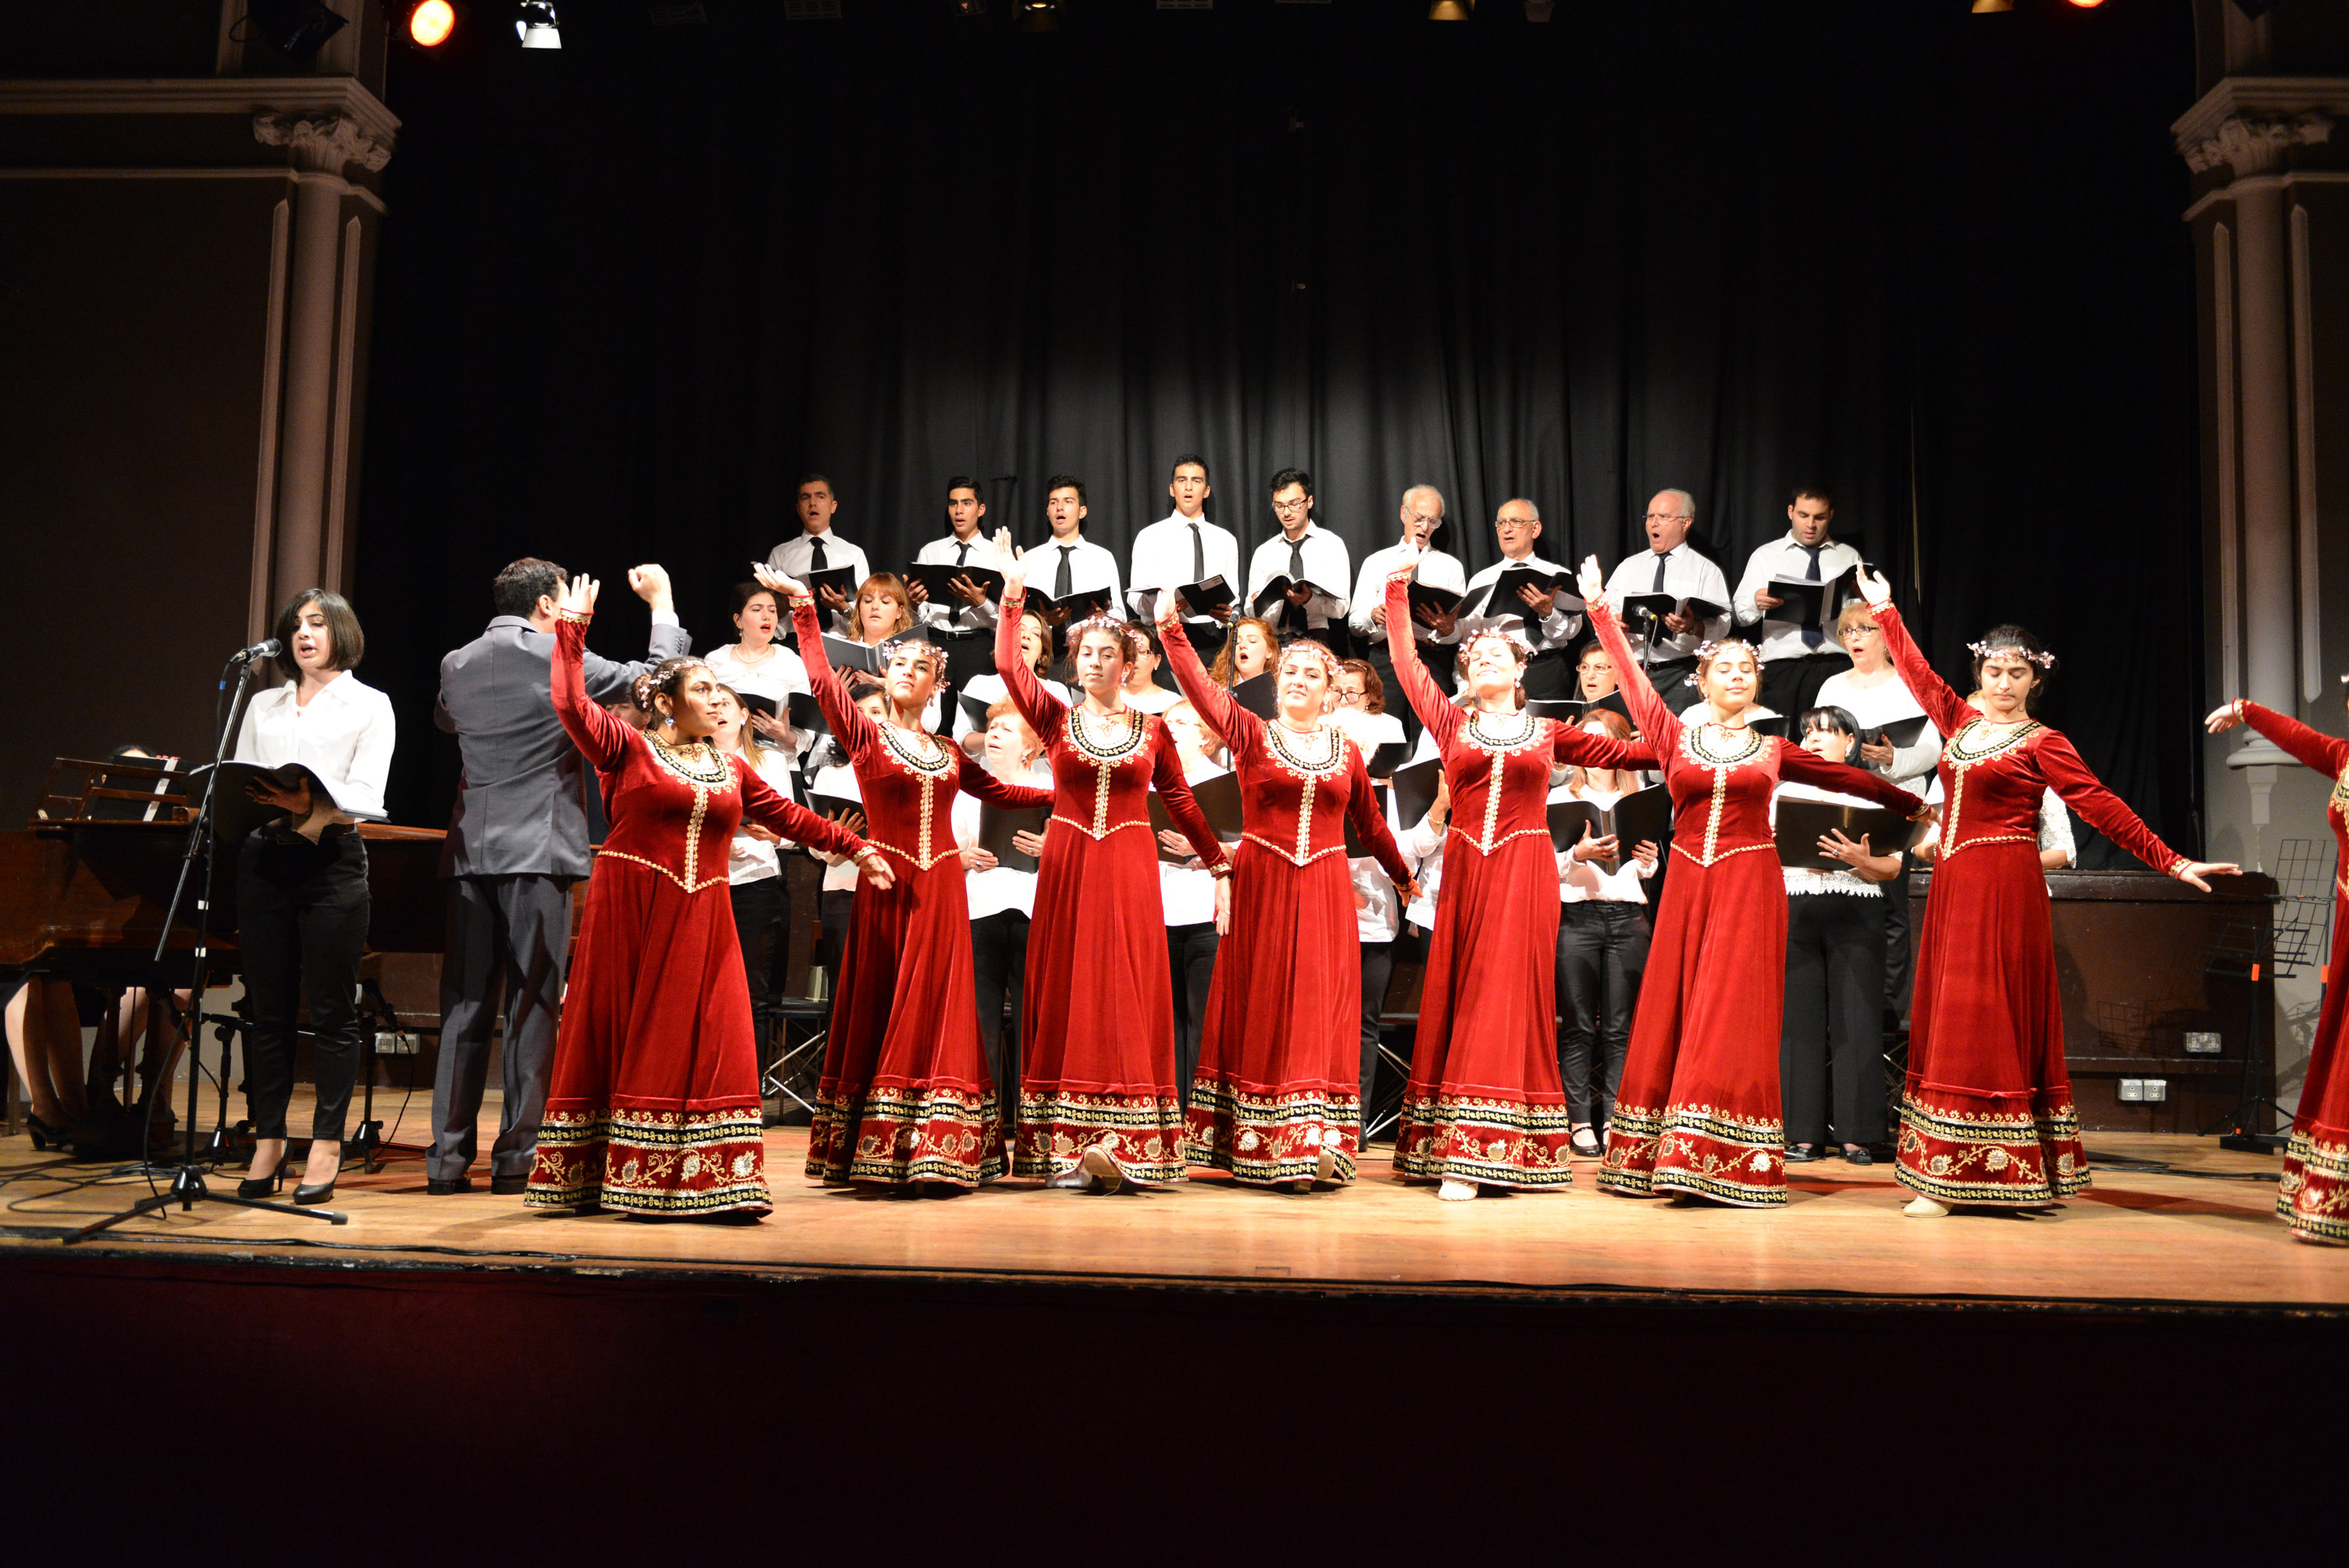 Concert for the 25th Anniversary Armenian Independence on 21 September 2016